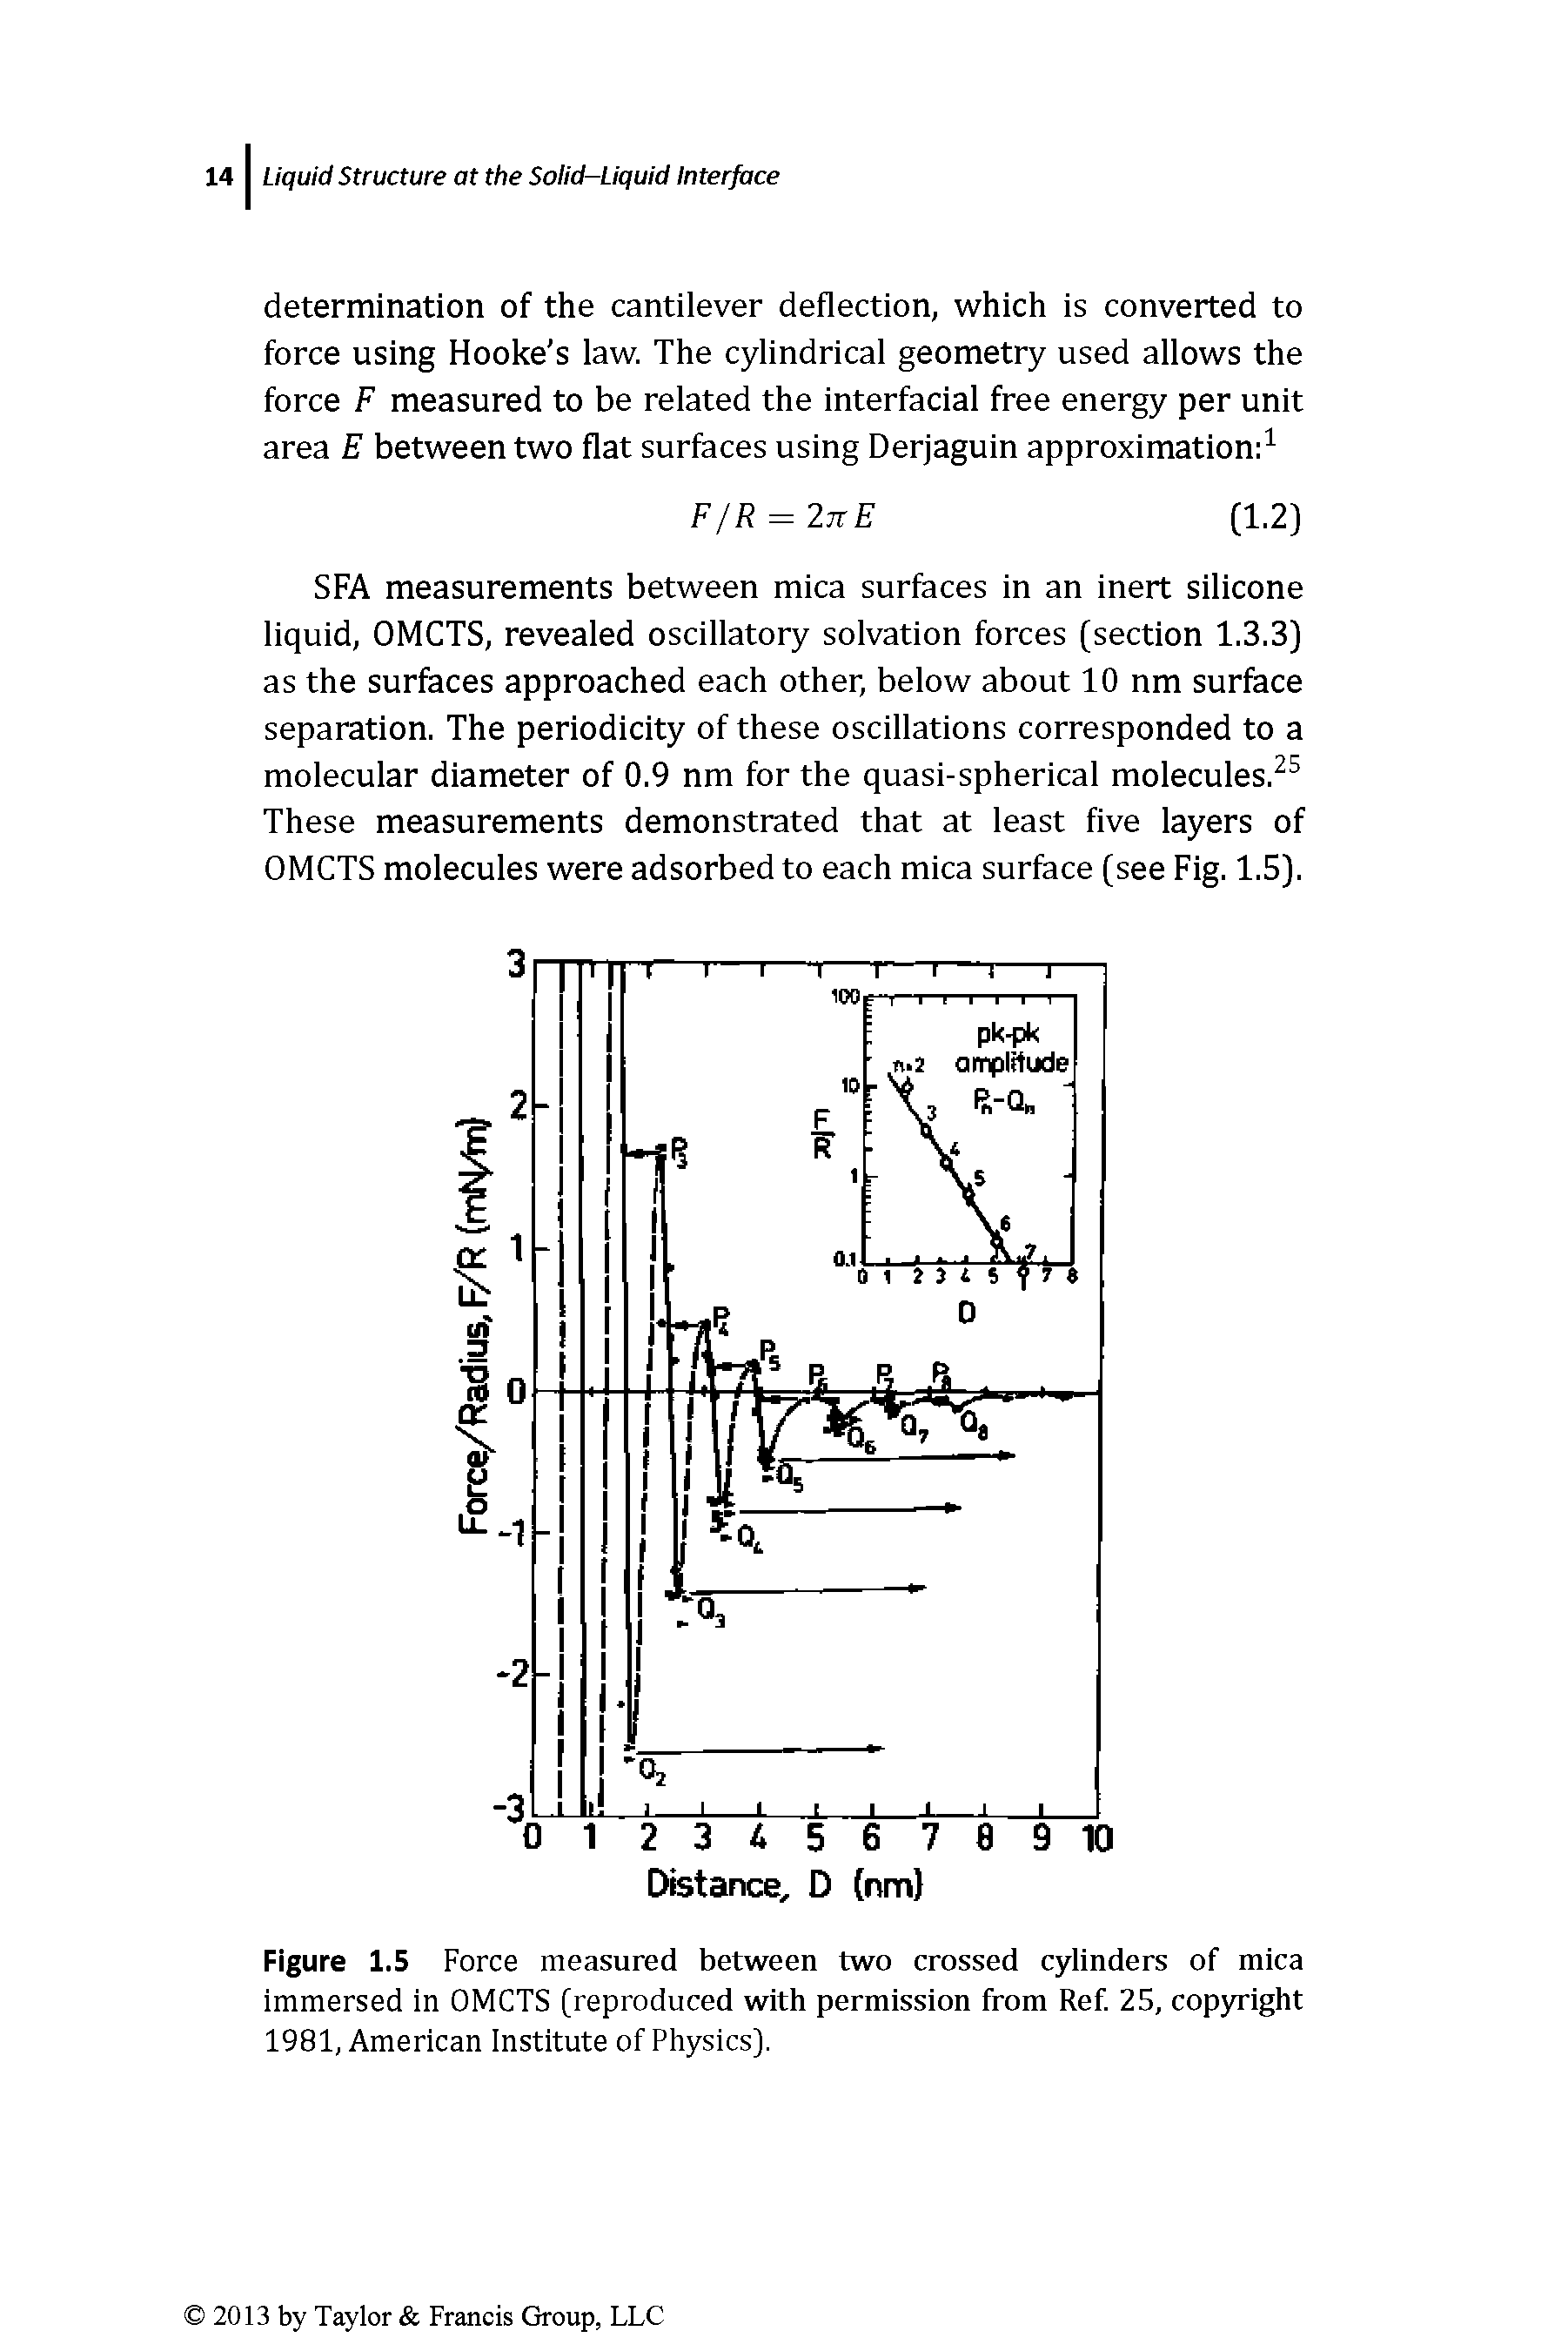 Figure 1.5 Force measured between two crossed cylinders of mica Immersed in OMCTS (reproduced with permission from Ref 25, copyright 1981, American Institute of Physics).